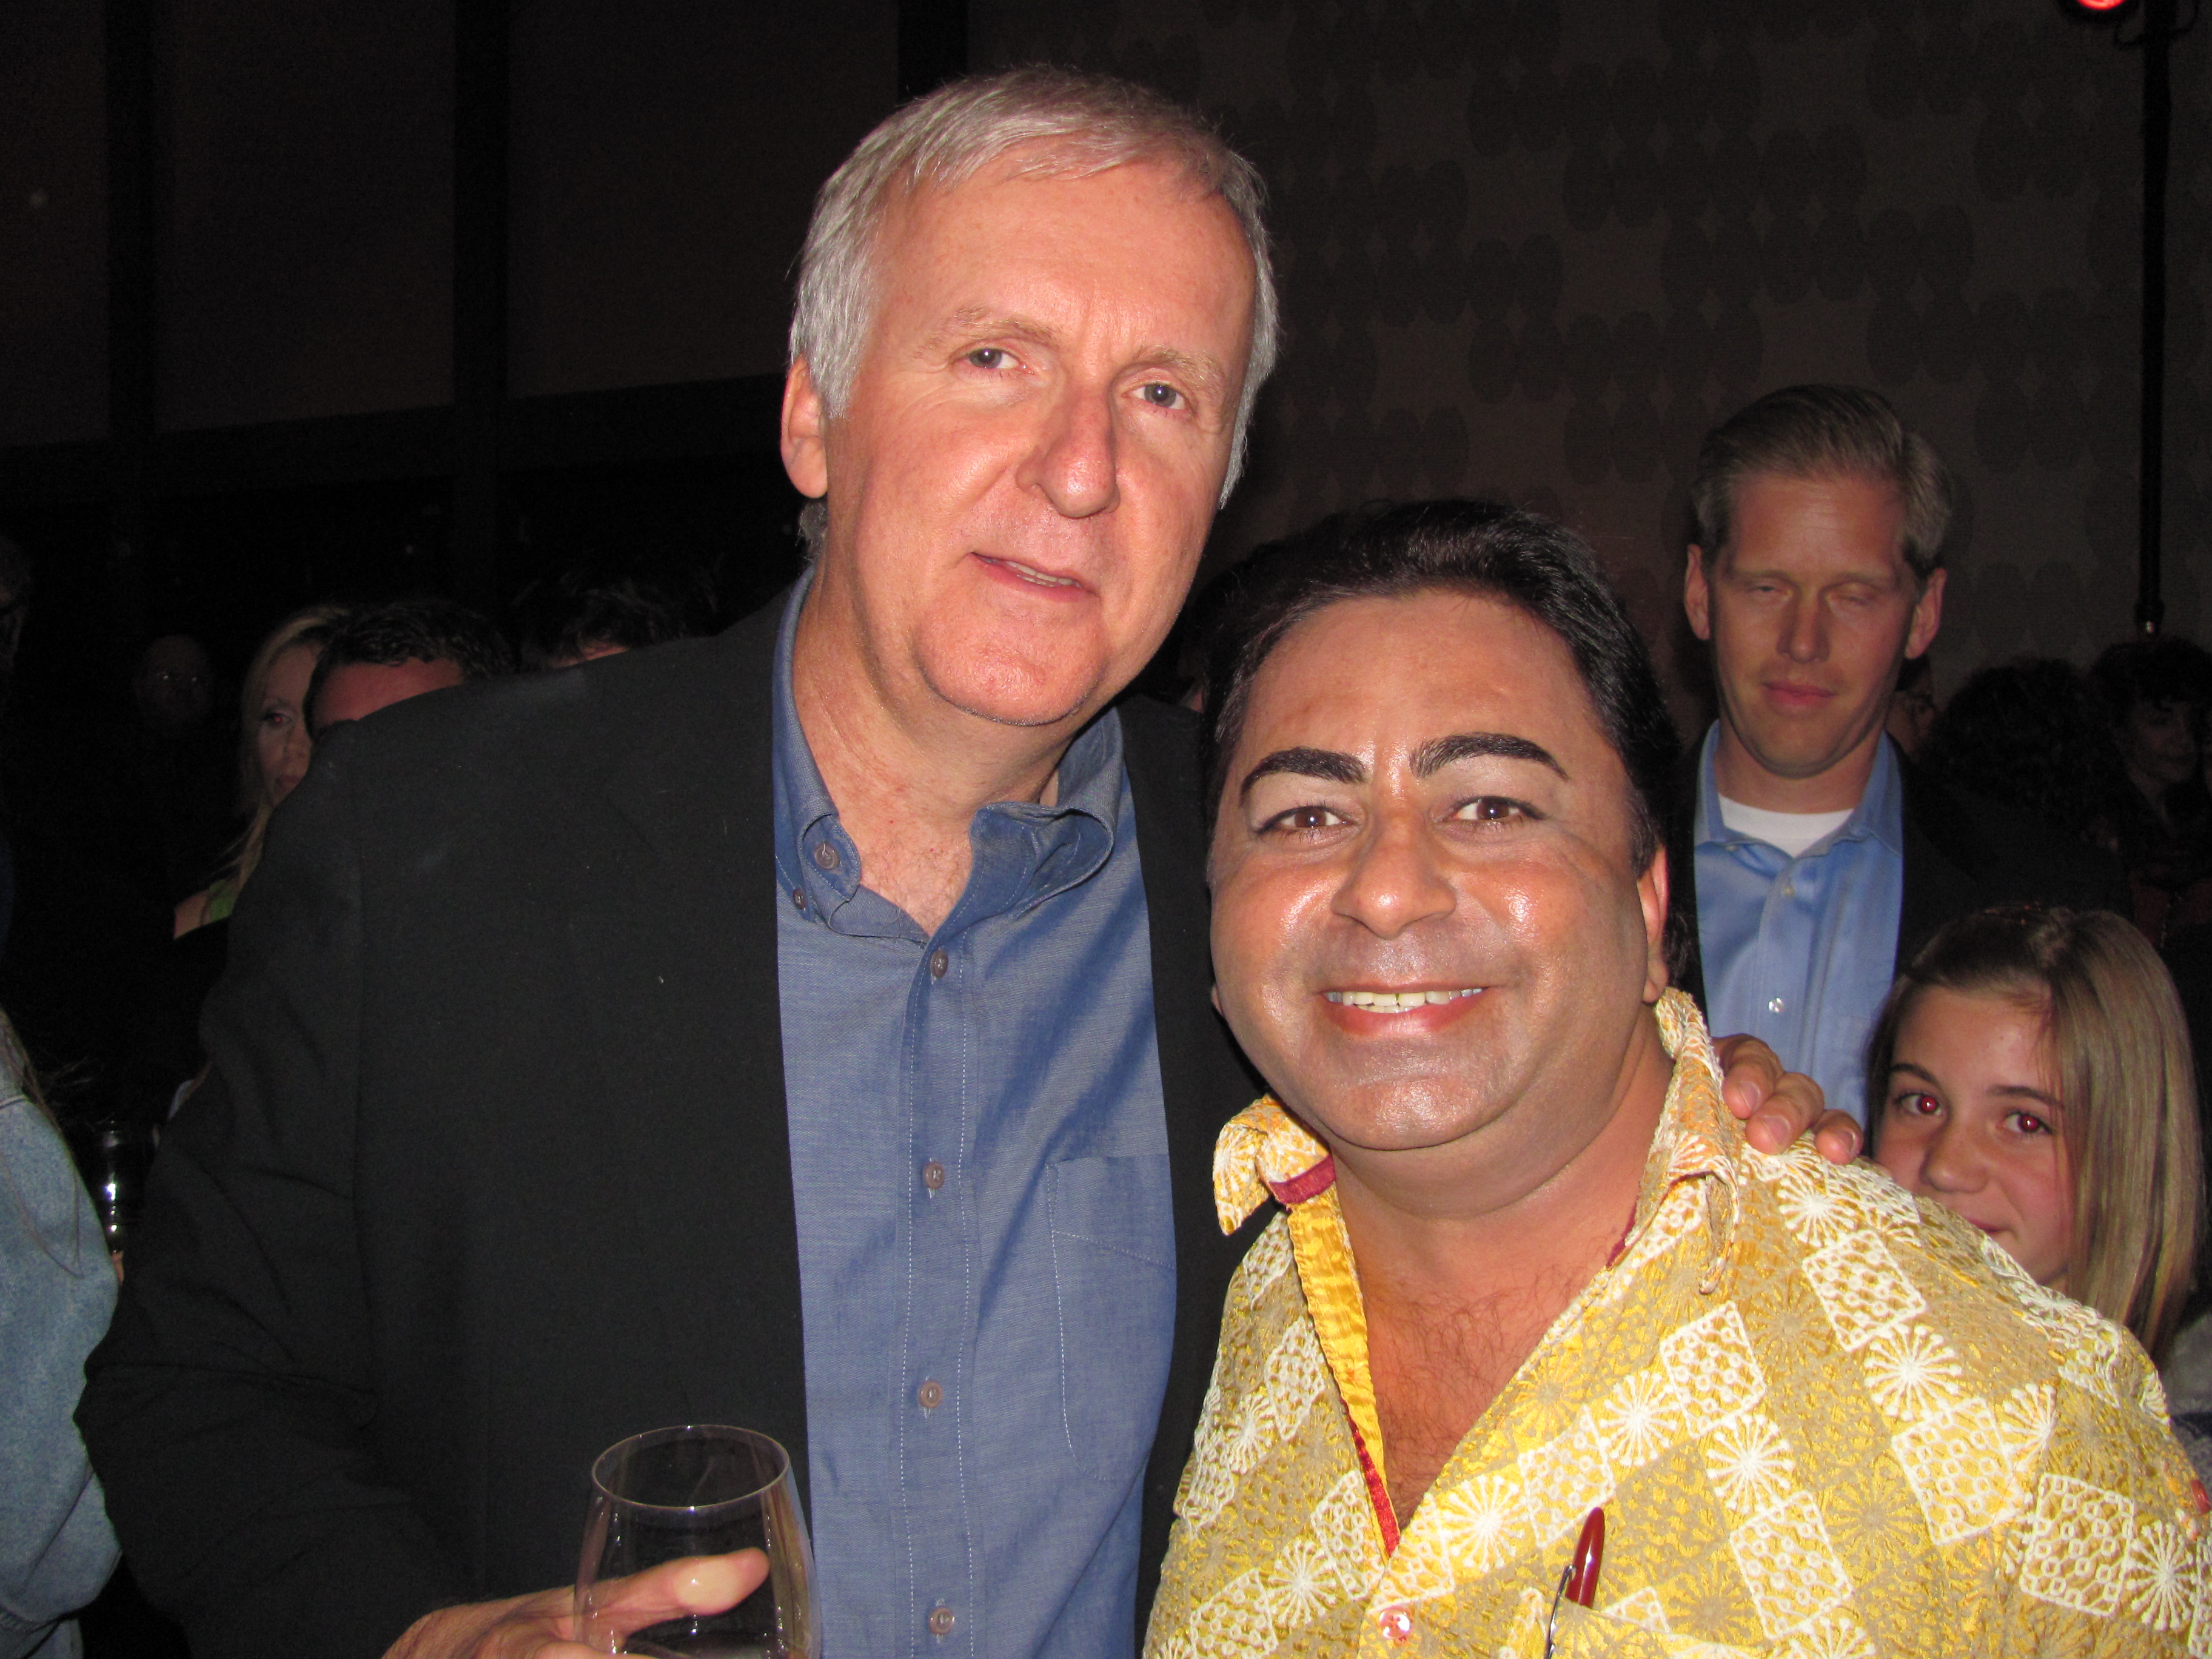 WITH HOLLYWOOD PRODUCER AND DIRECTOR JAMES CAMERON